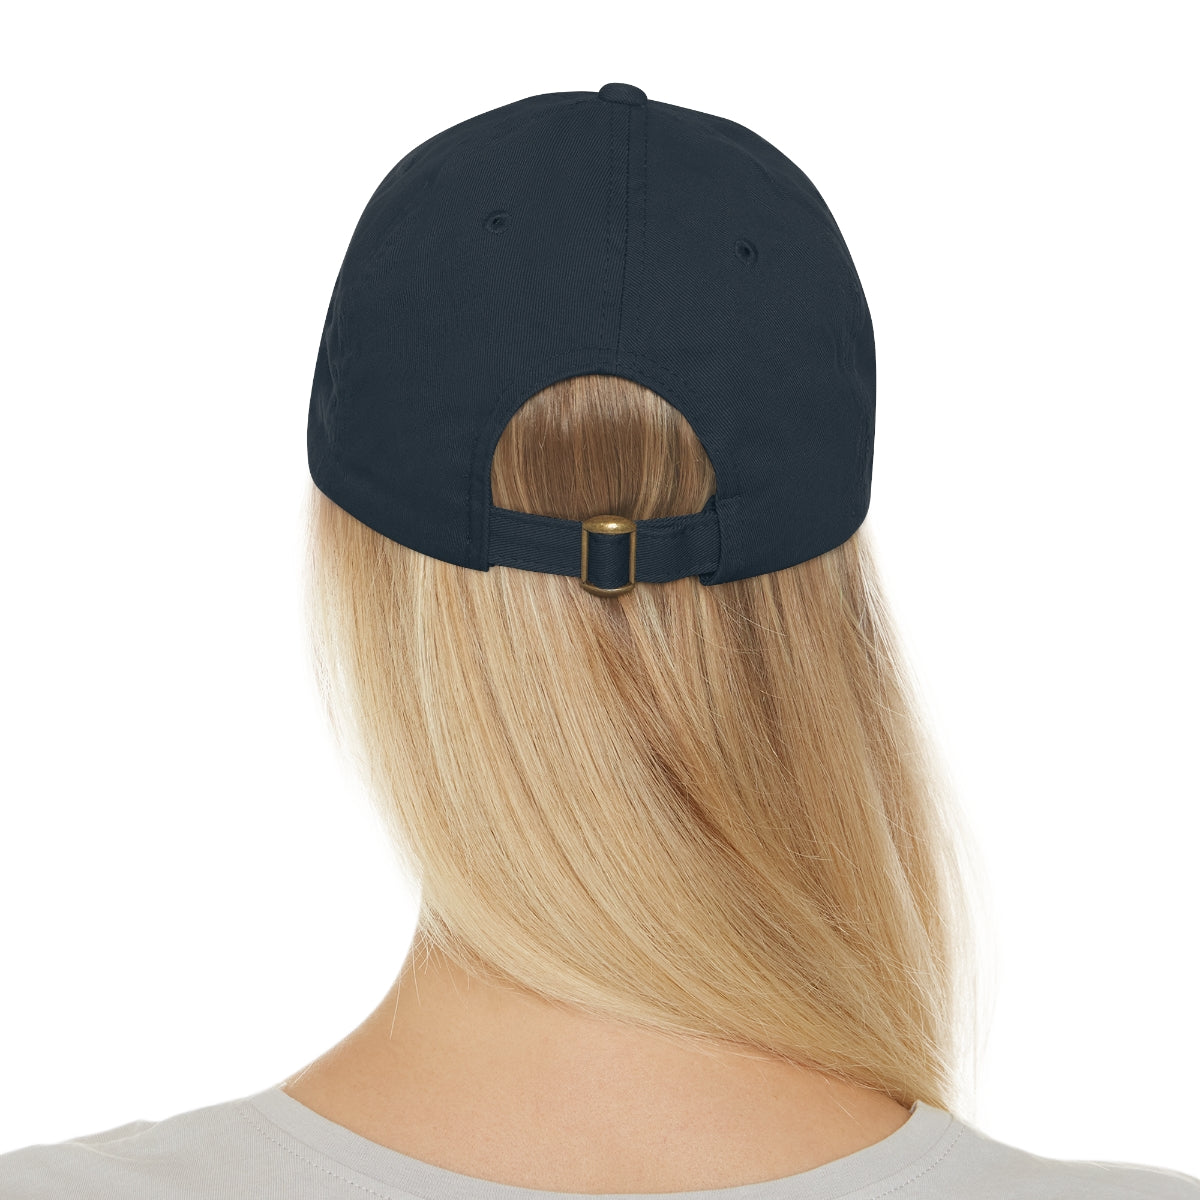 Treemont Hat: "Patch"